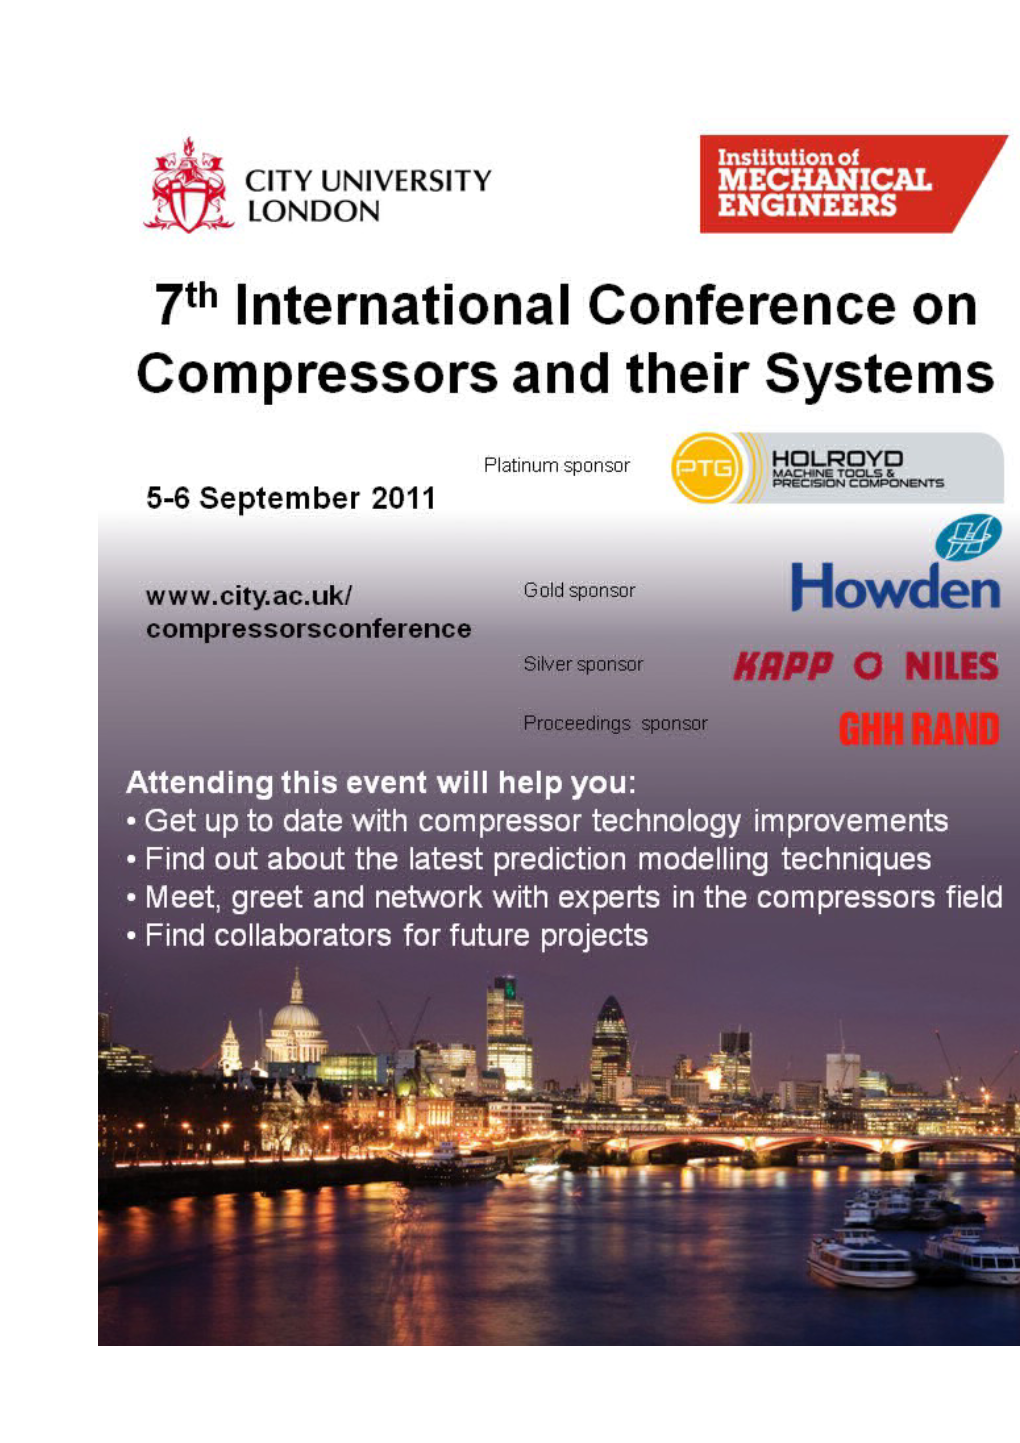 International Conference on Compressors and Their Systems